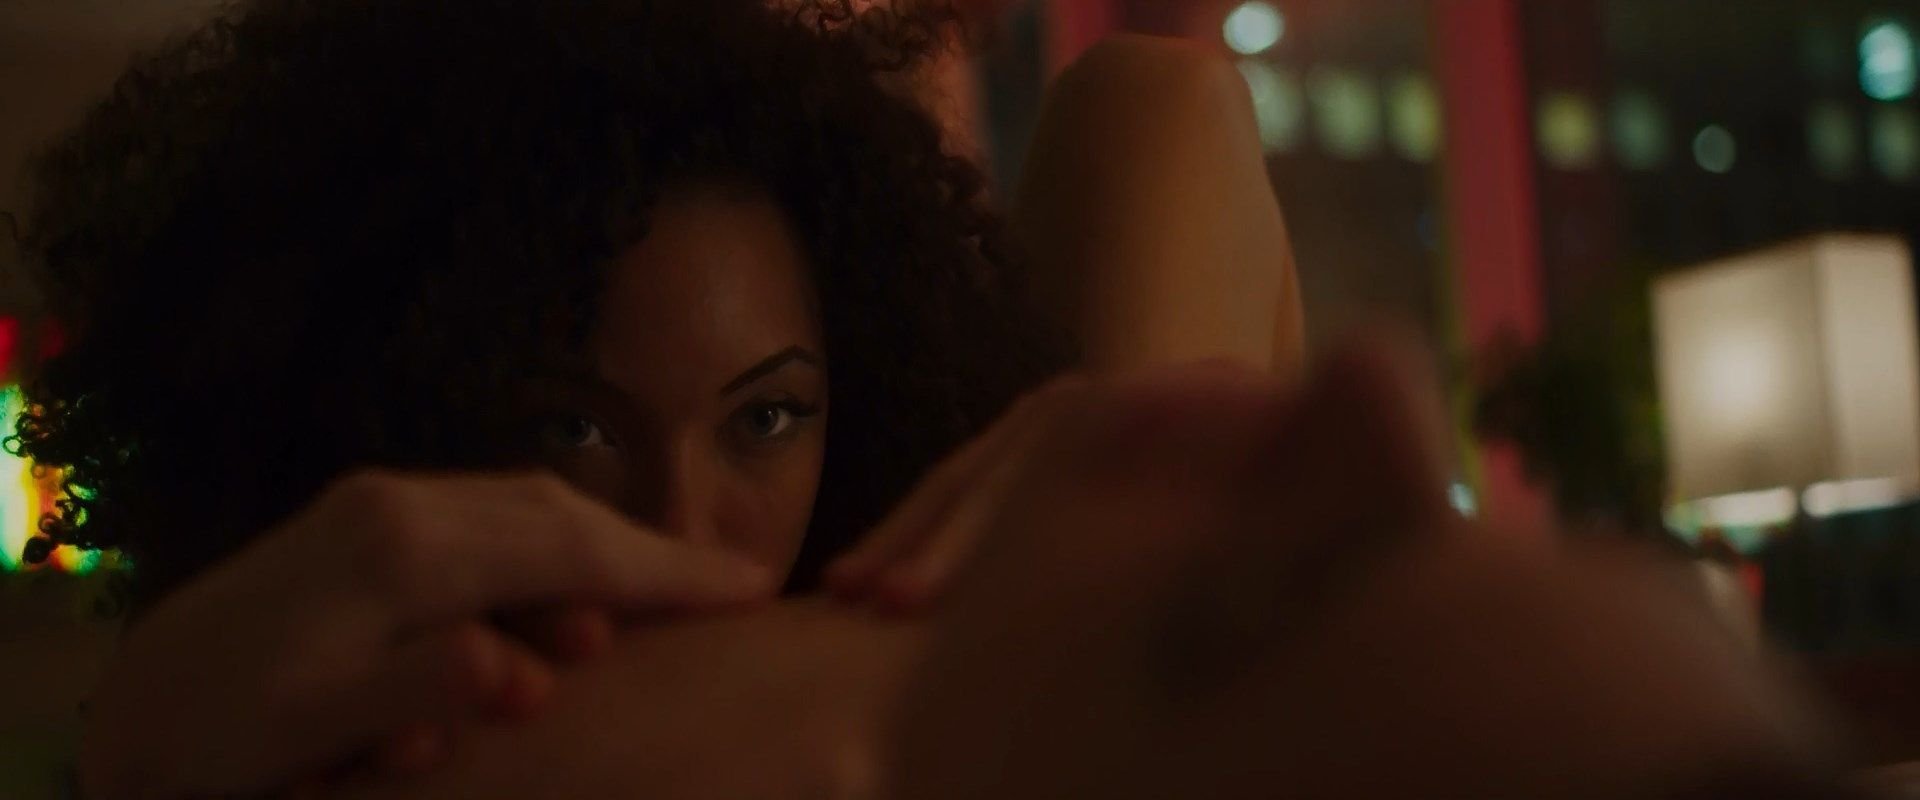 Logan Browning Allison Williams Nude The Perfection 12